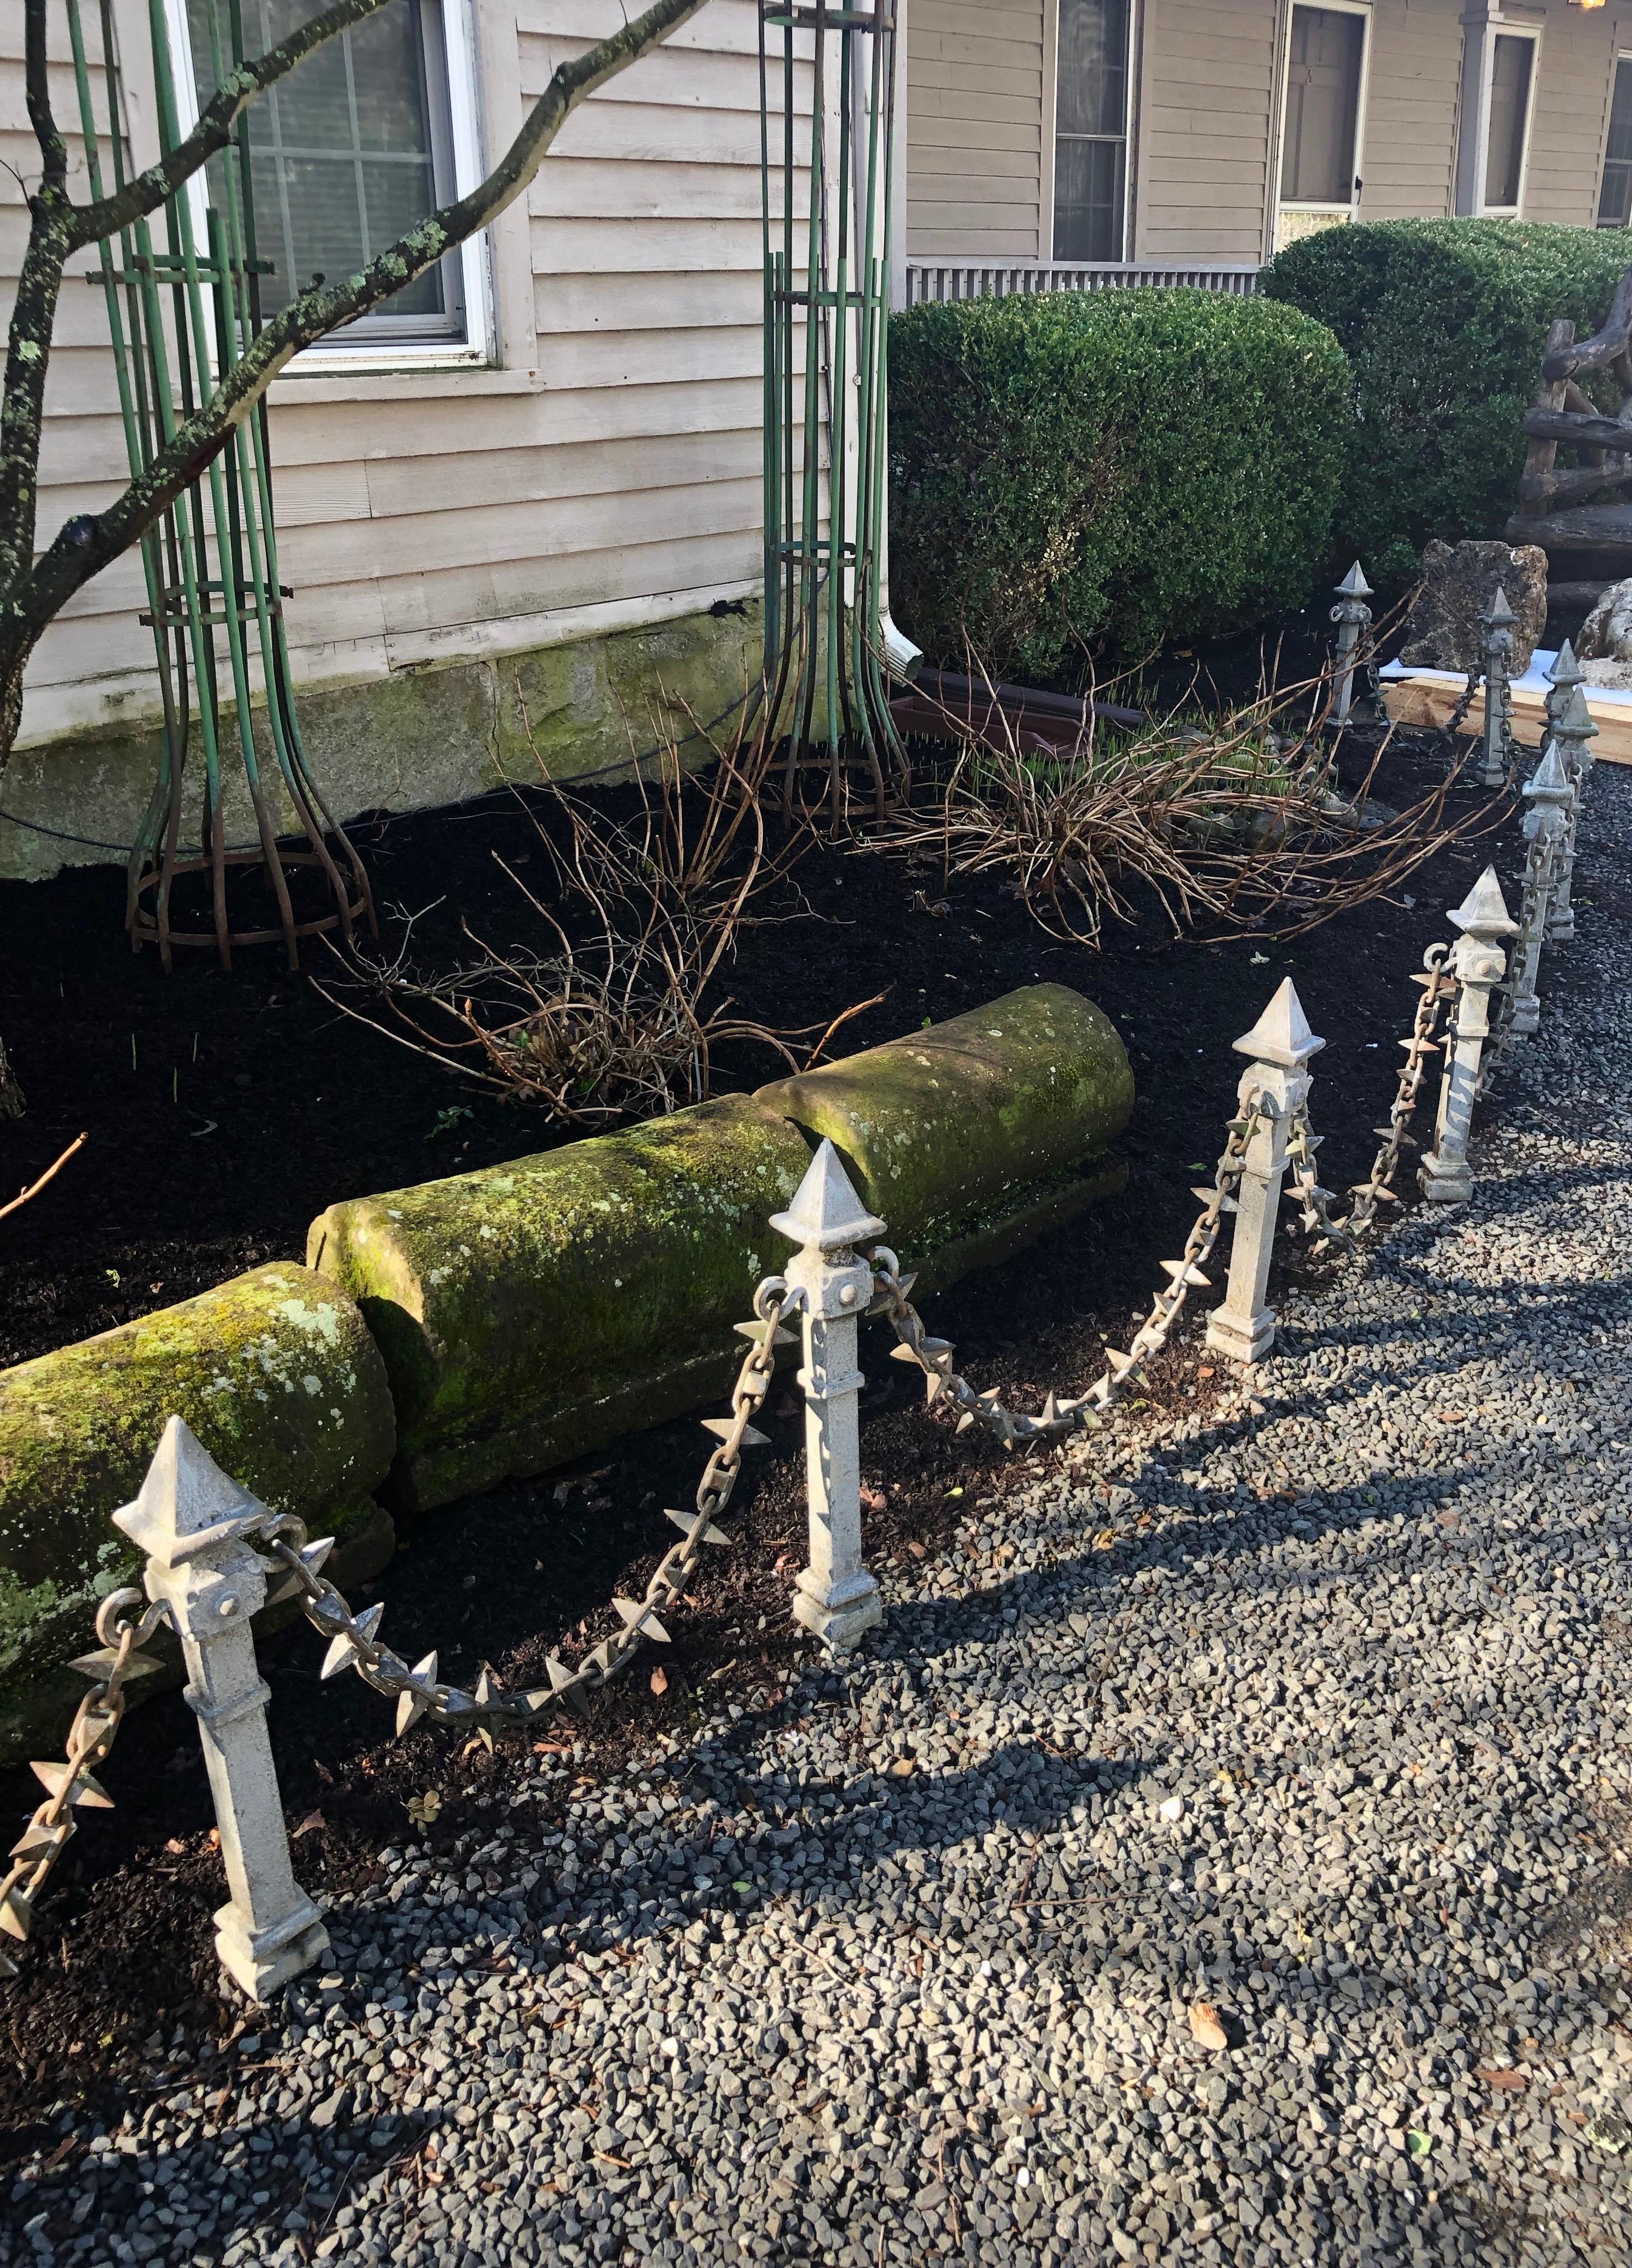 Most homes and gardens have a spot that needs to be cordoned off to prevent unwanted access and these fabulous bollards will do it in style! When we bought them, they had no way of being stabilized in an upright position, so we had custom,